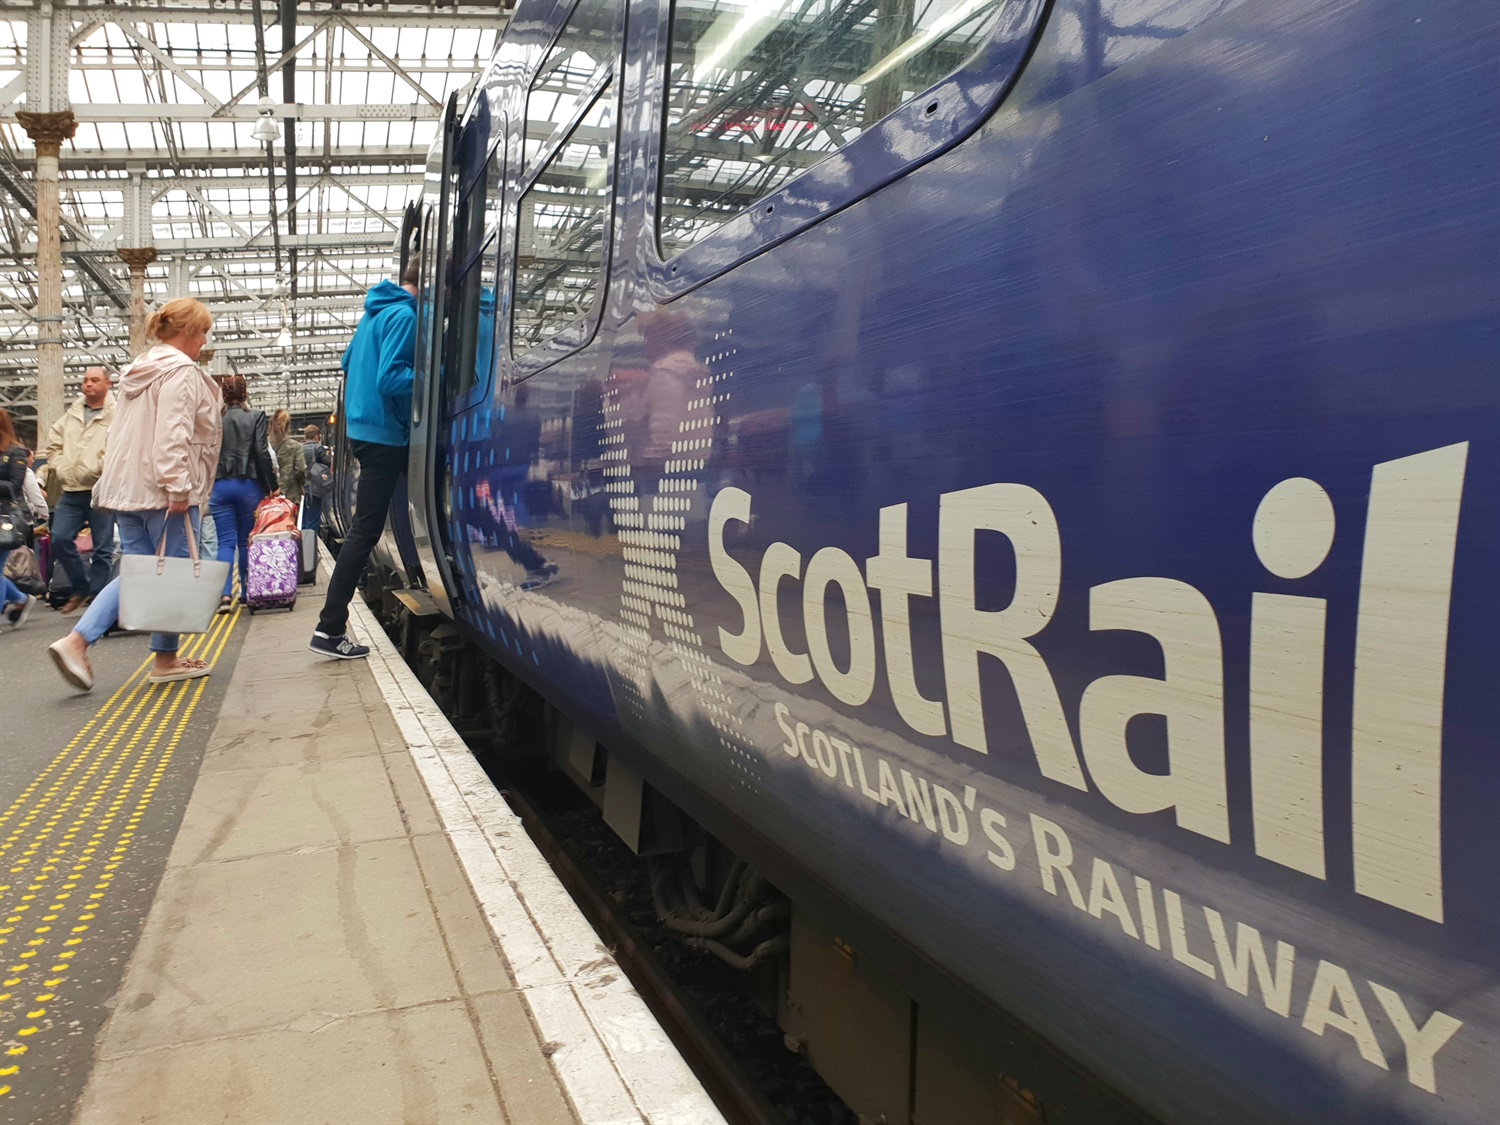 ScotRail submits £18m improvement plan in response to government improvement notice